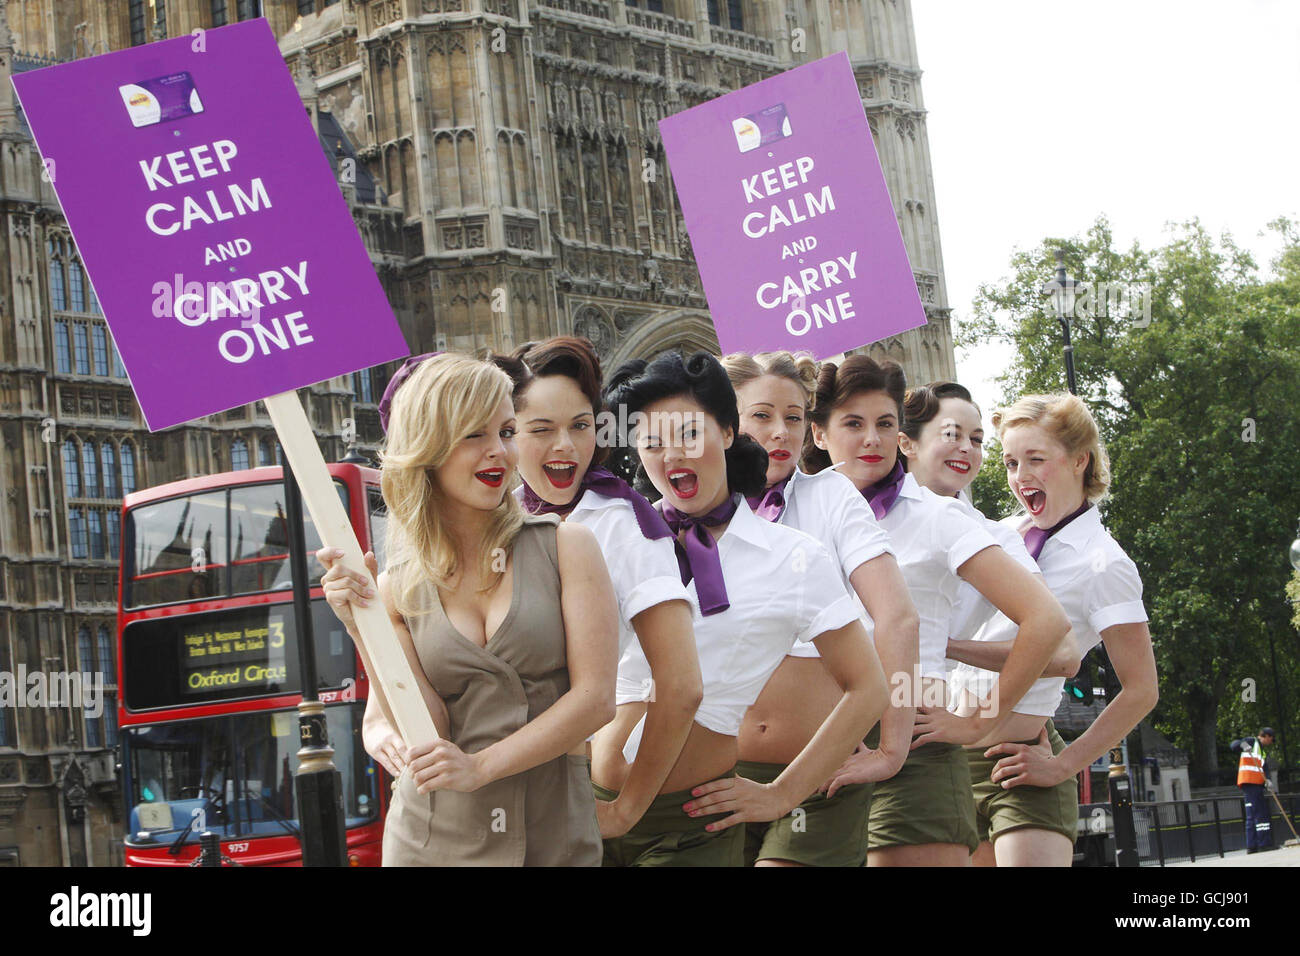 TV actress Tina O'Brien (left) and the 'Nectar Budget Babes' rally the nation to 'Keep Calm and Carry One' in Parliament Square, London. As the government unveils its Budget, Nectar is encouraging consumers to use loyalty cards to save money and still treat themselves. Stock Photo